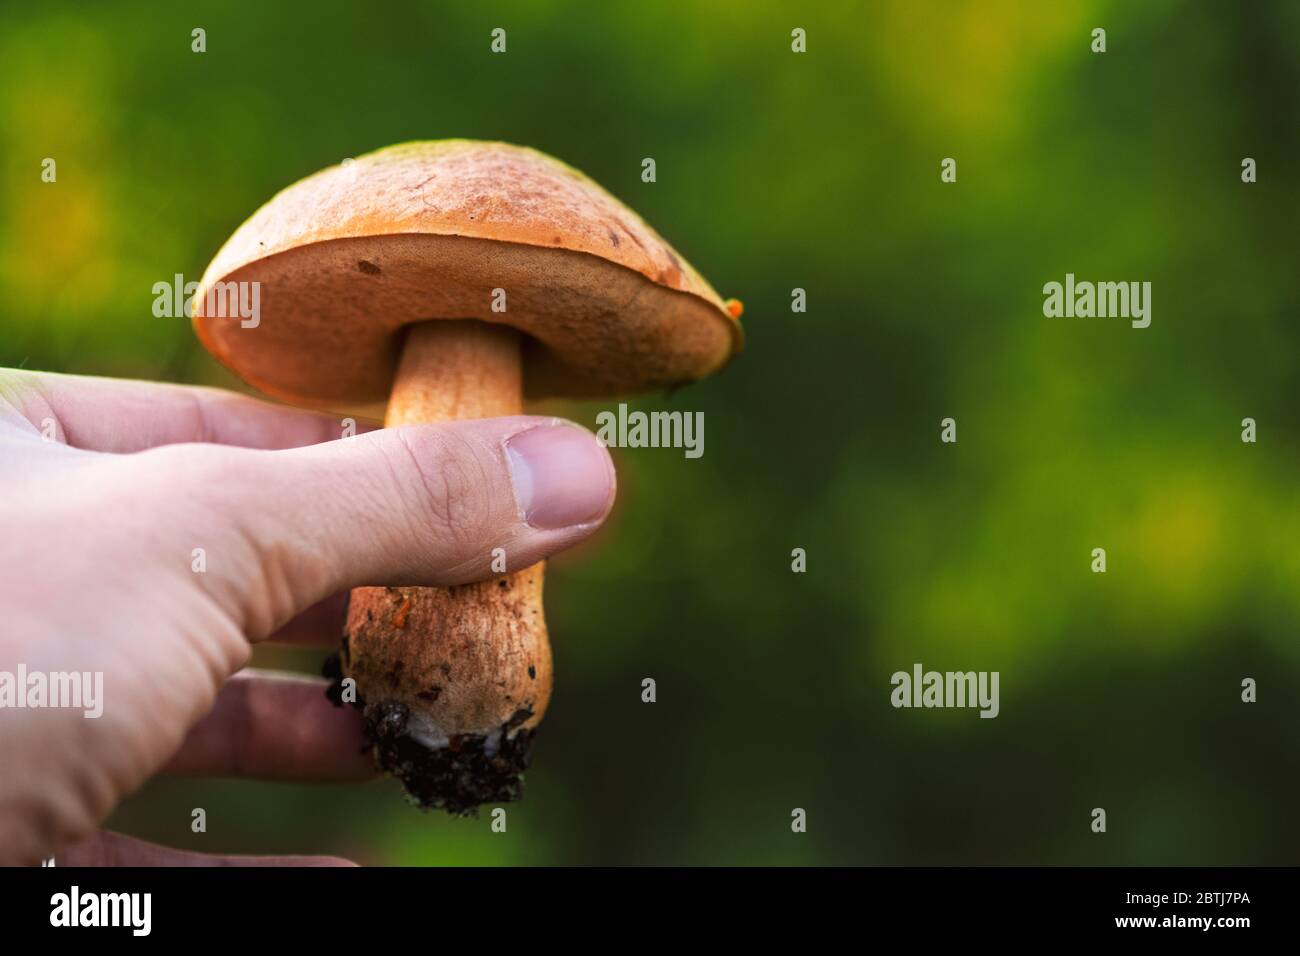 Close up shot of a toxic mushroom in nature and a green background holding it with hand. Stock Photo